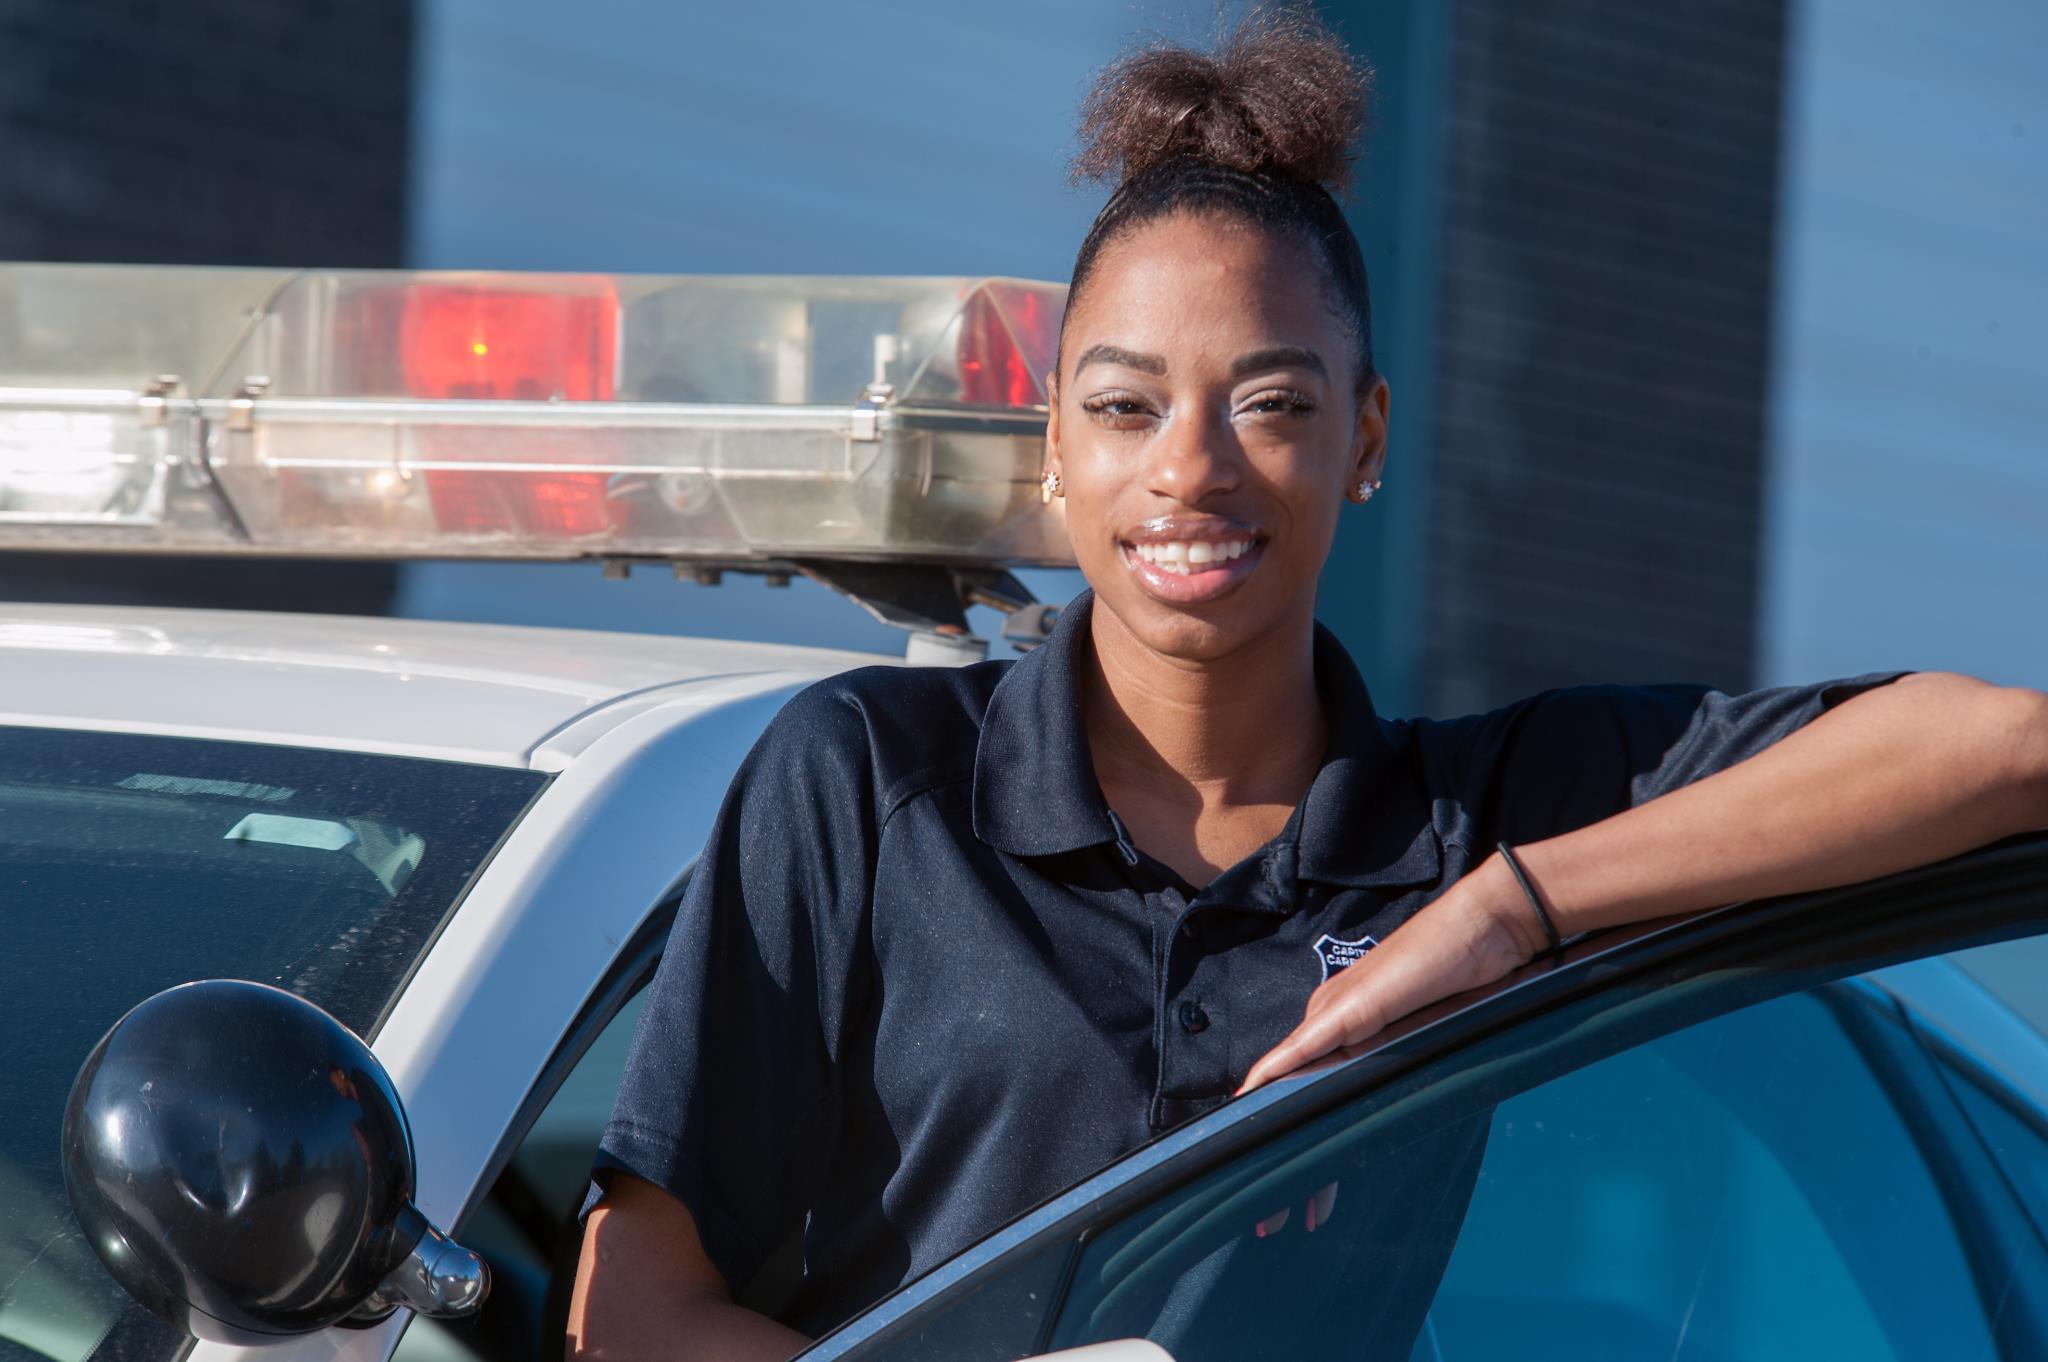 Female Law Enforcement student leans on the door of a patrol car